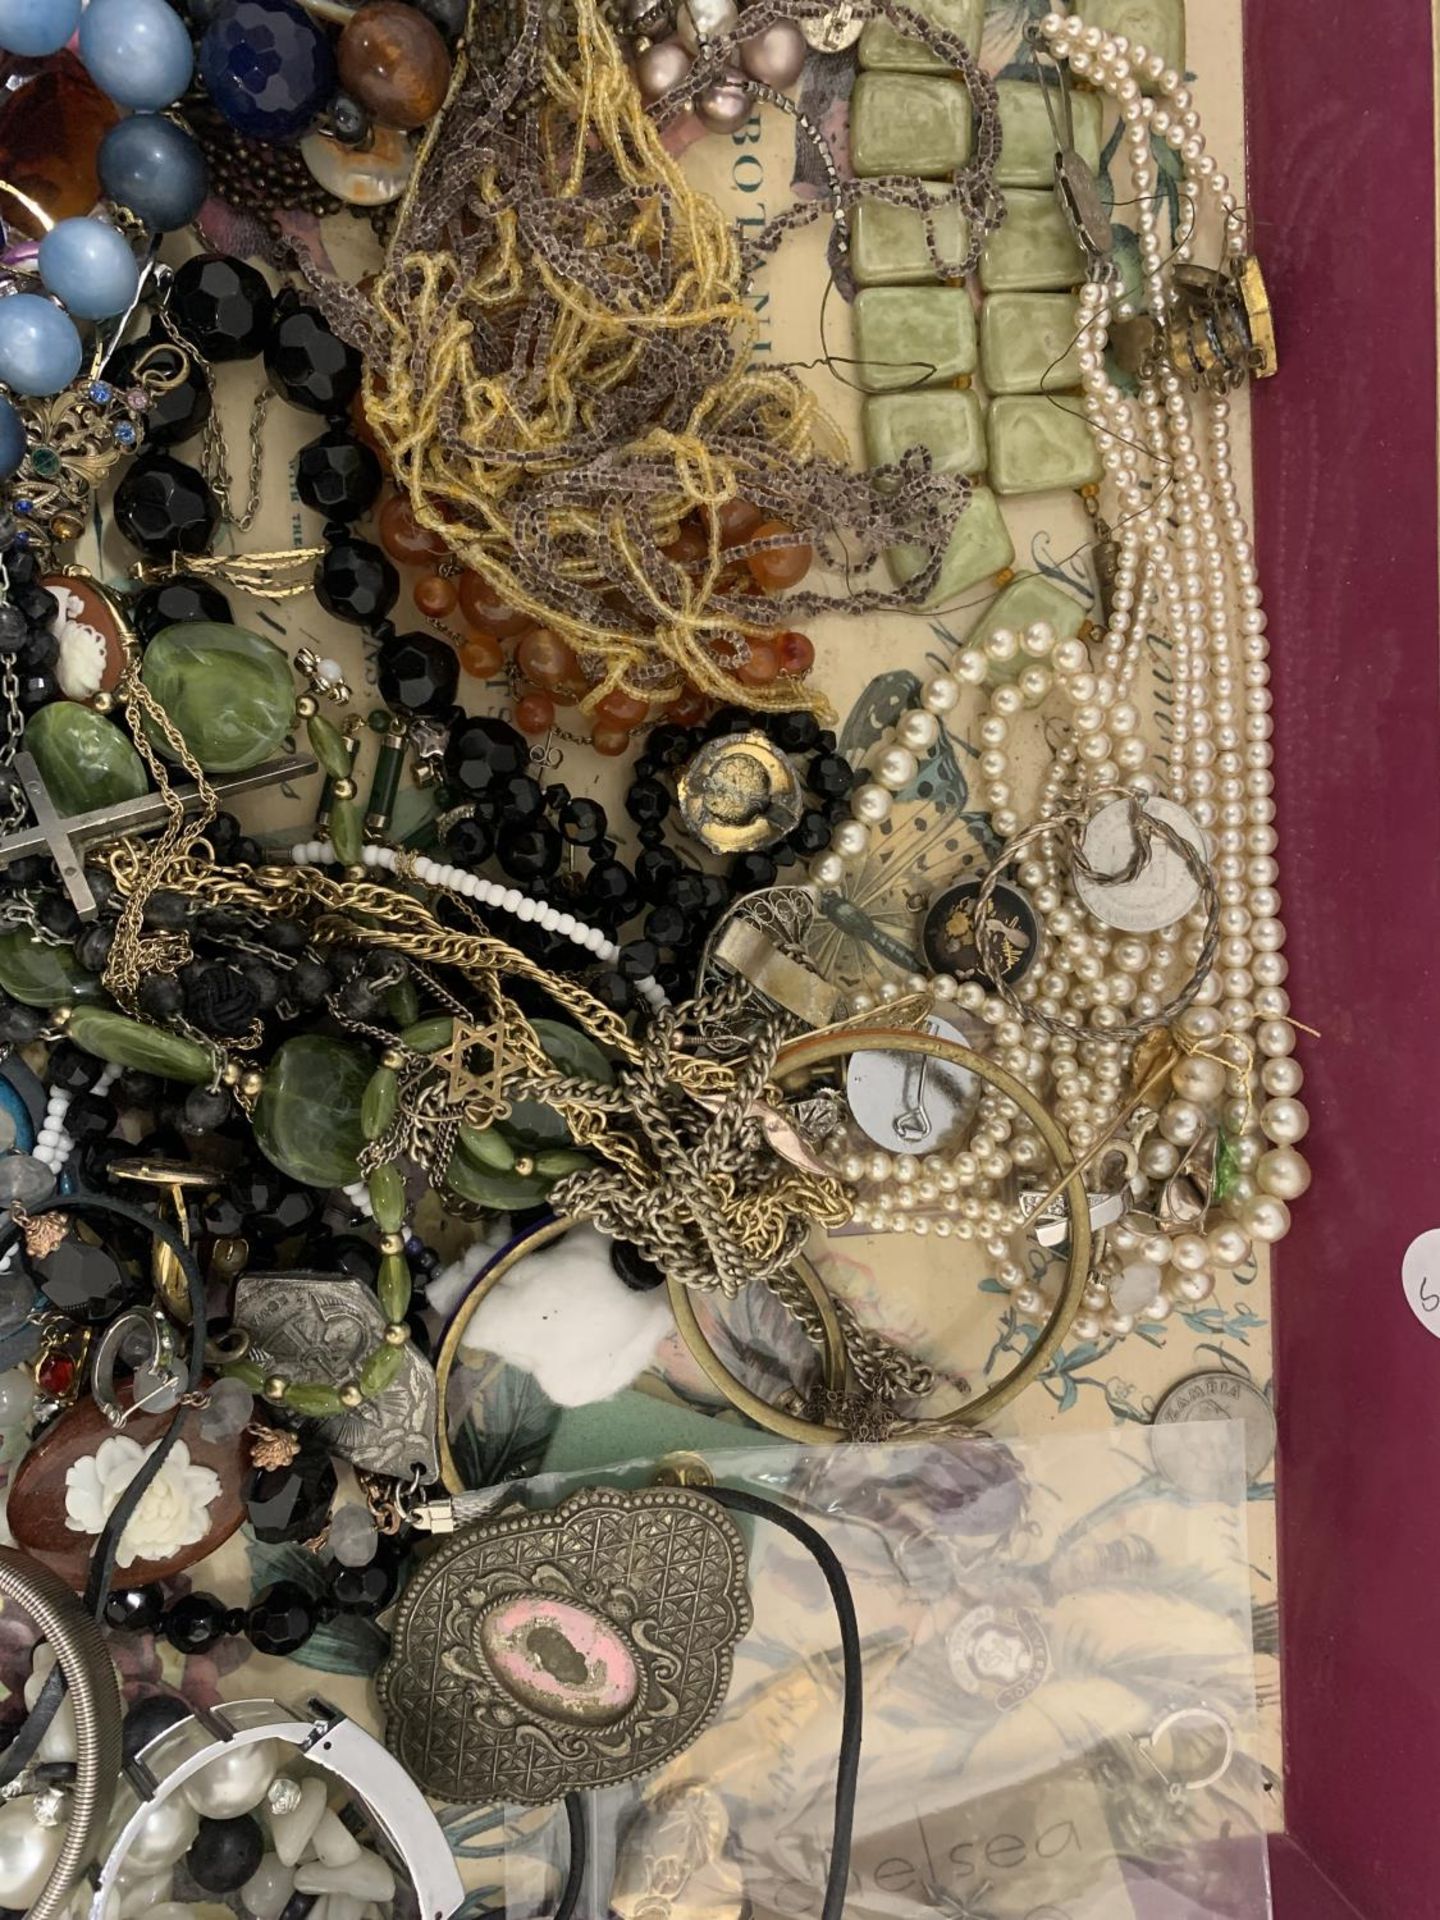 A QUANTITY OF COSTUME JEWELLERY TO INCLUDE NECKLACES, BRACELETS, EARRINGS, ETC ON A VINTAGE TRAY - Image 4 of 5